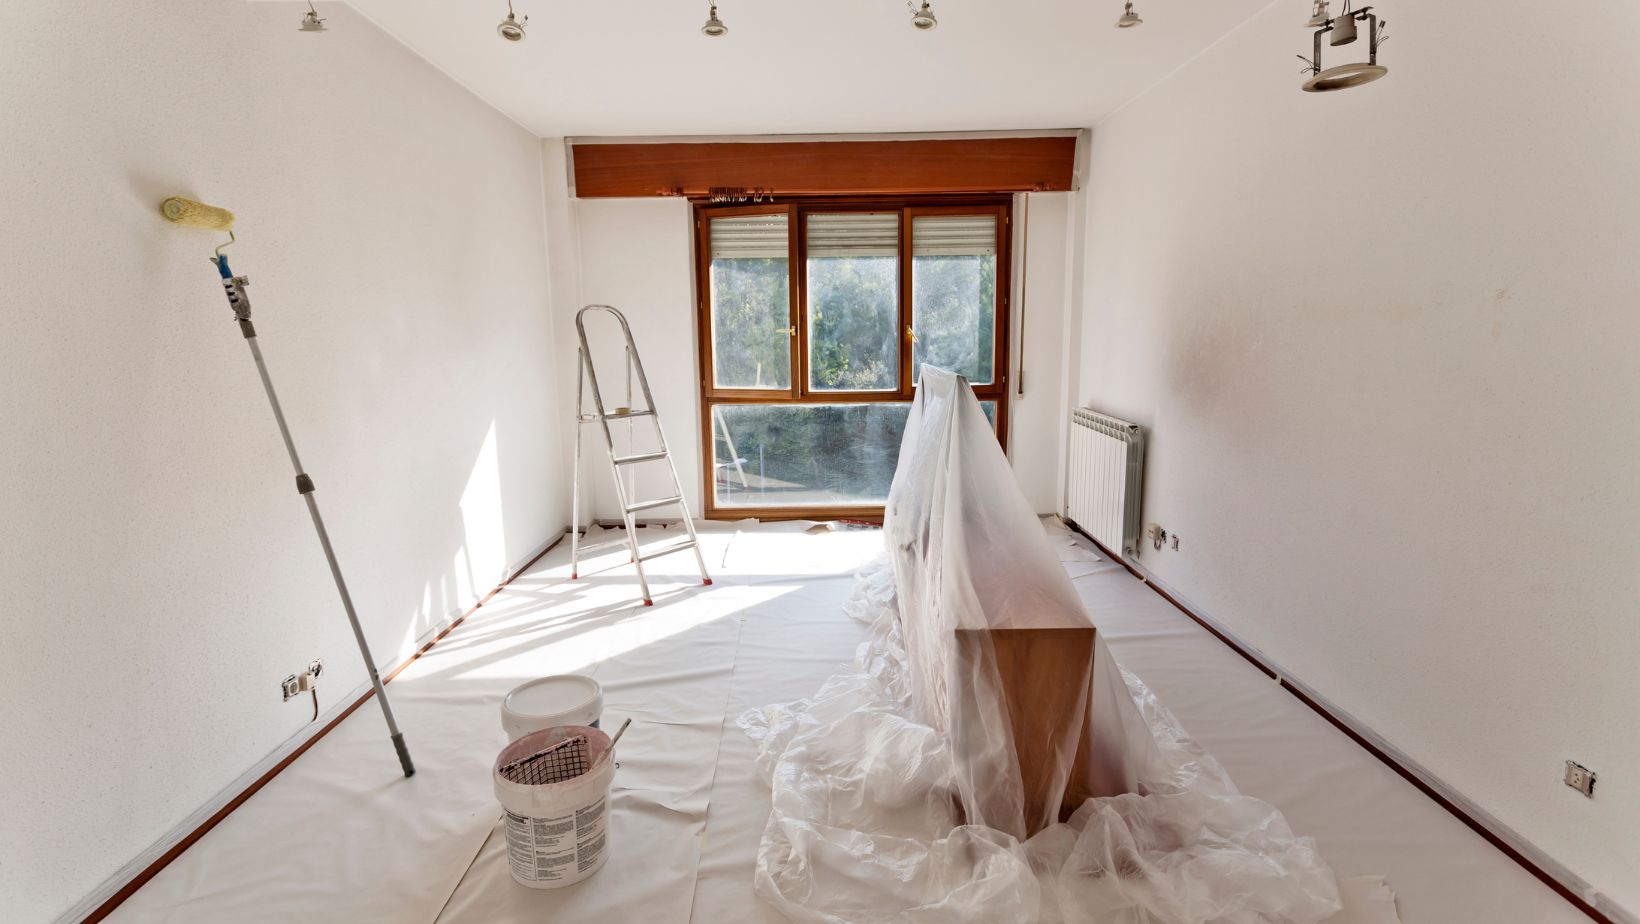 How Much To Paint Interior Of House